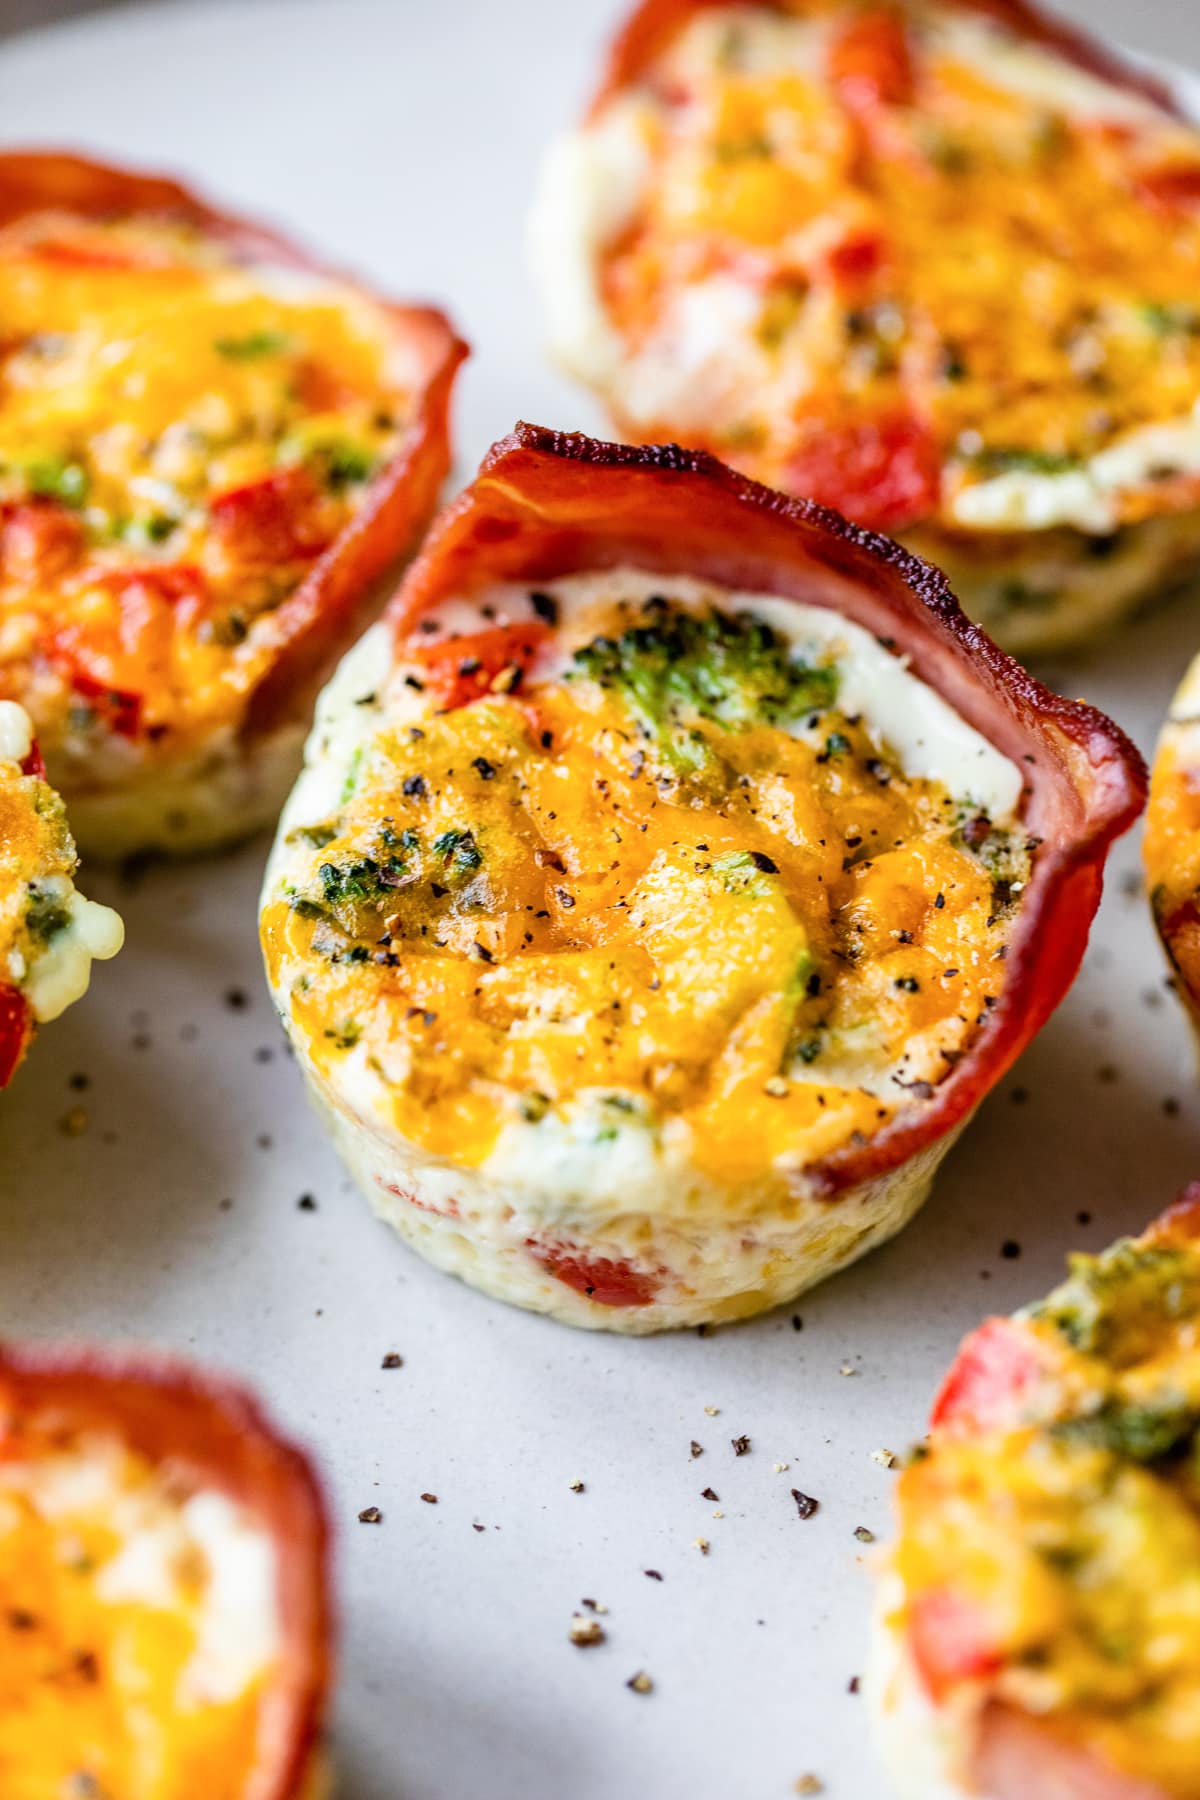 Egg White Muffins with Turkey Bacon, Cottage Cheese and Veggies